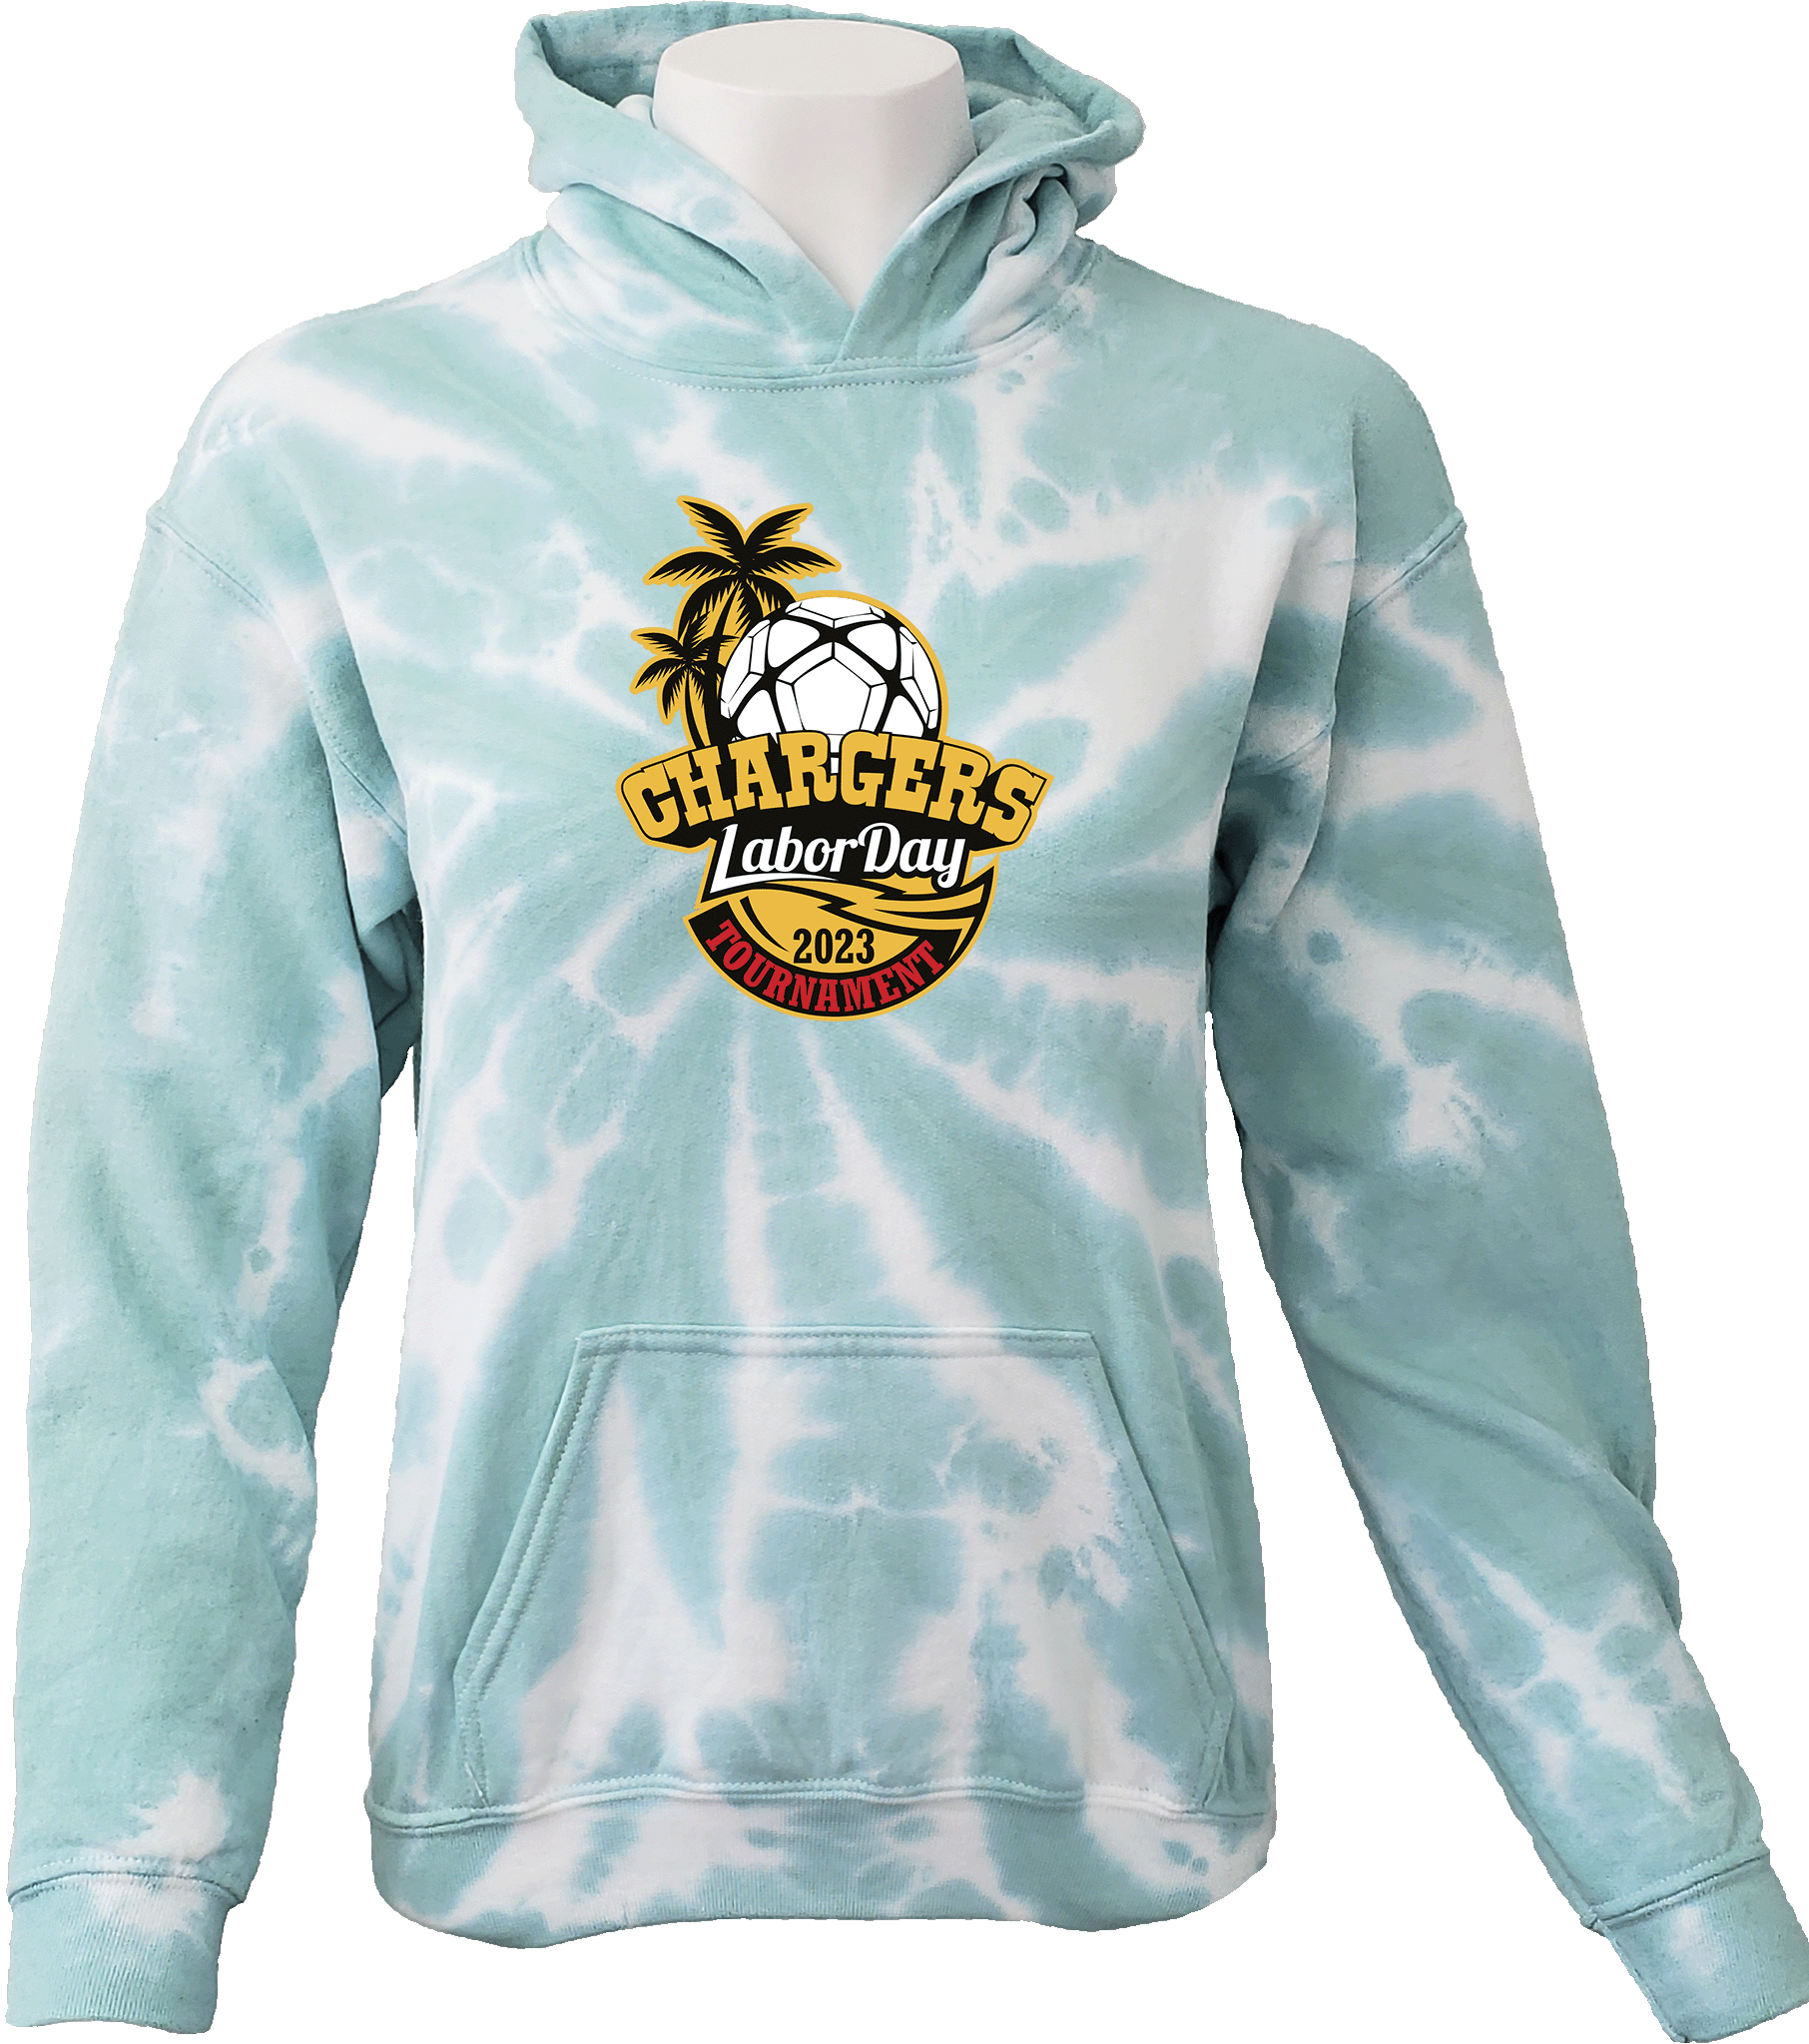 Tie-Dye Hoodies - 2023 Chargers Labor Day Tournament